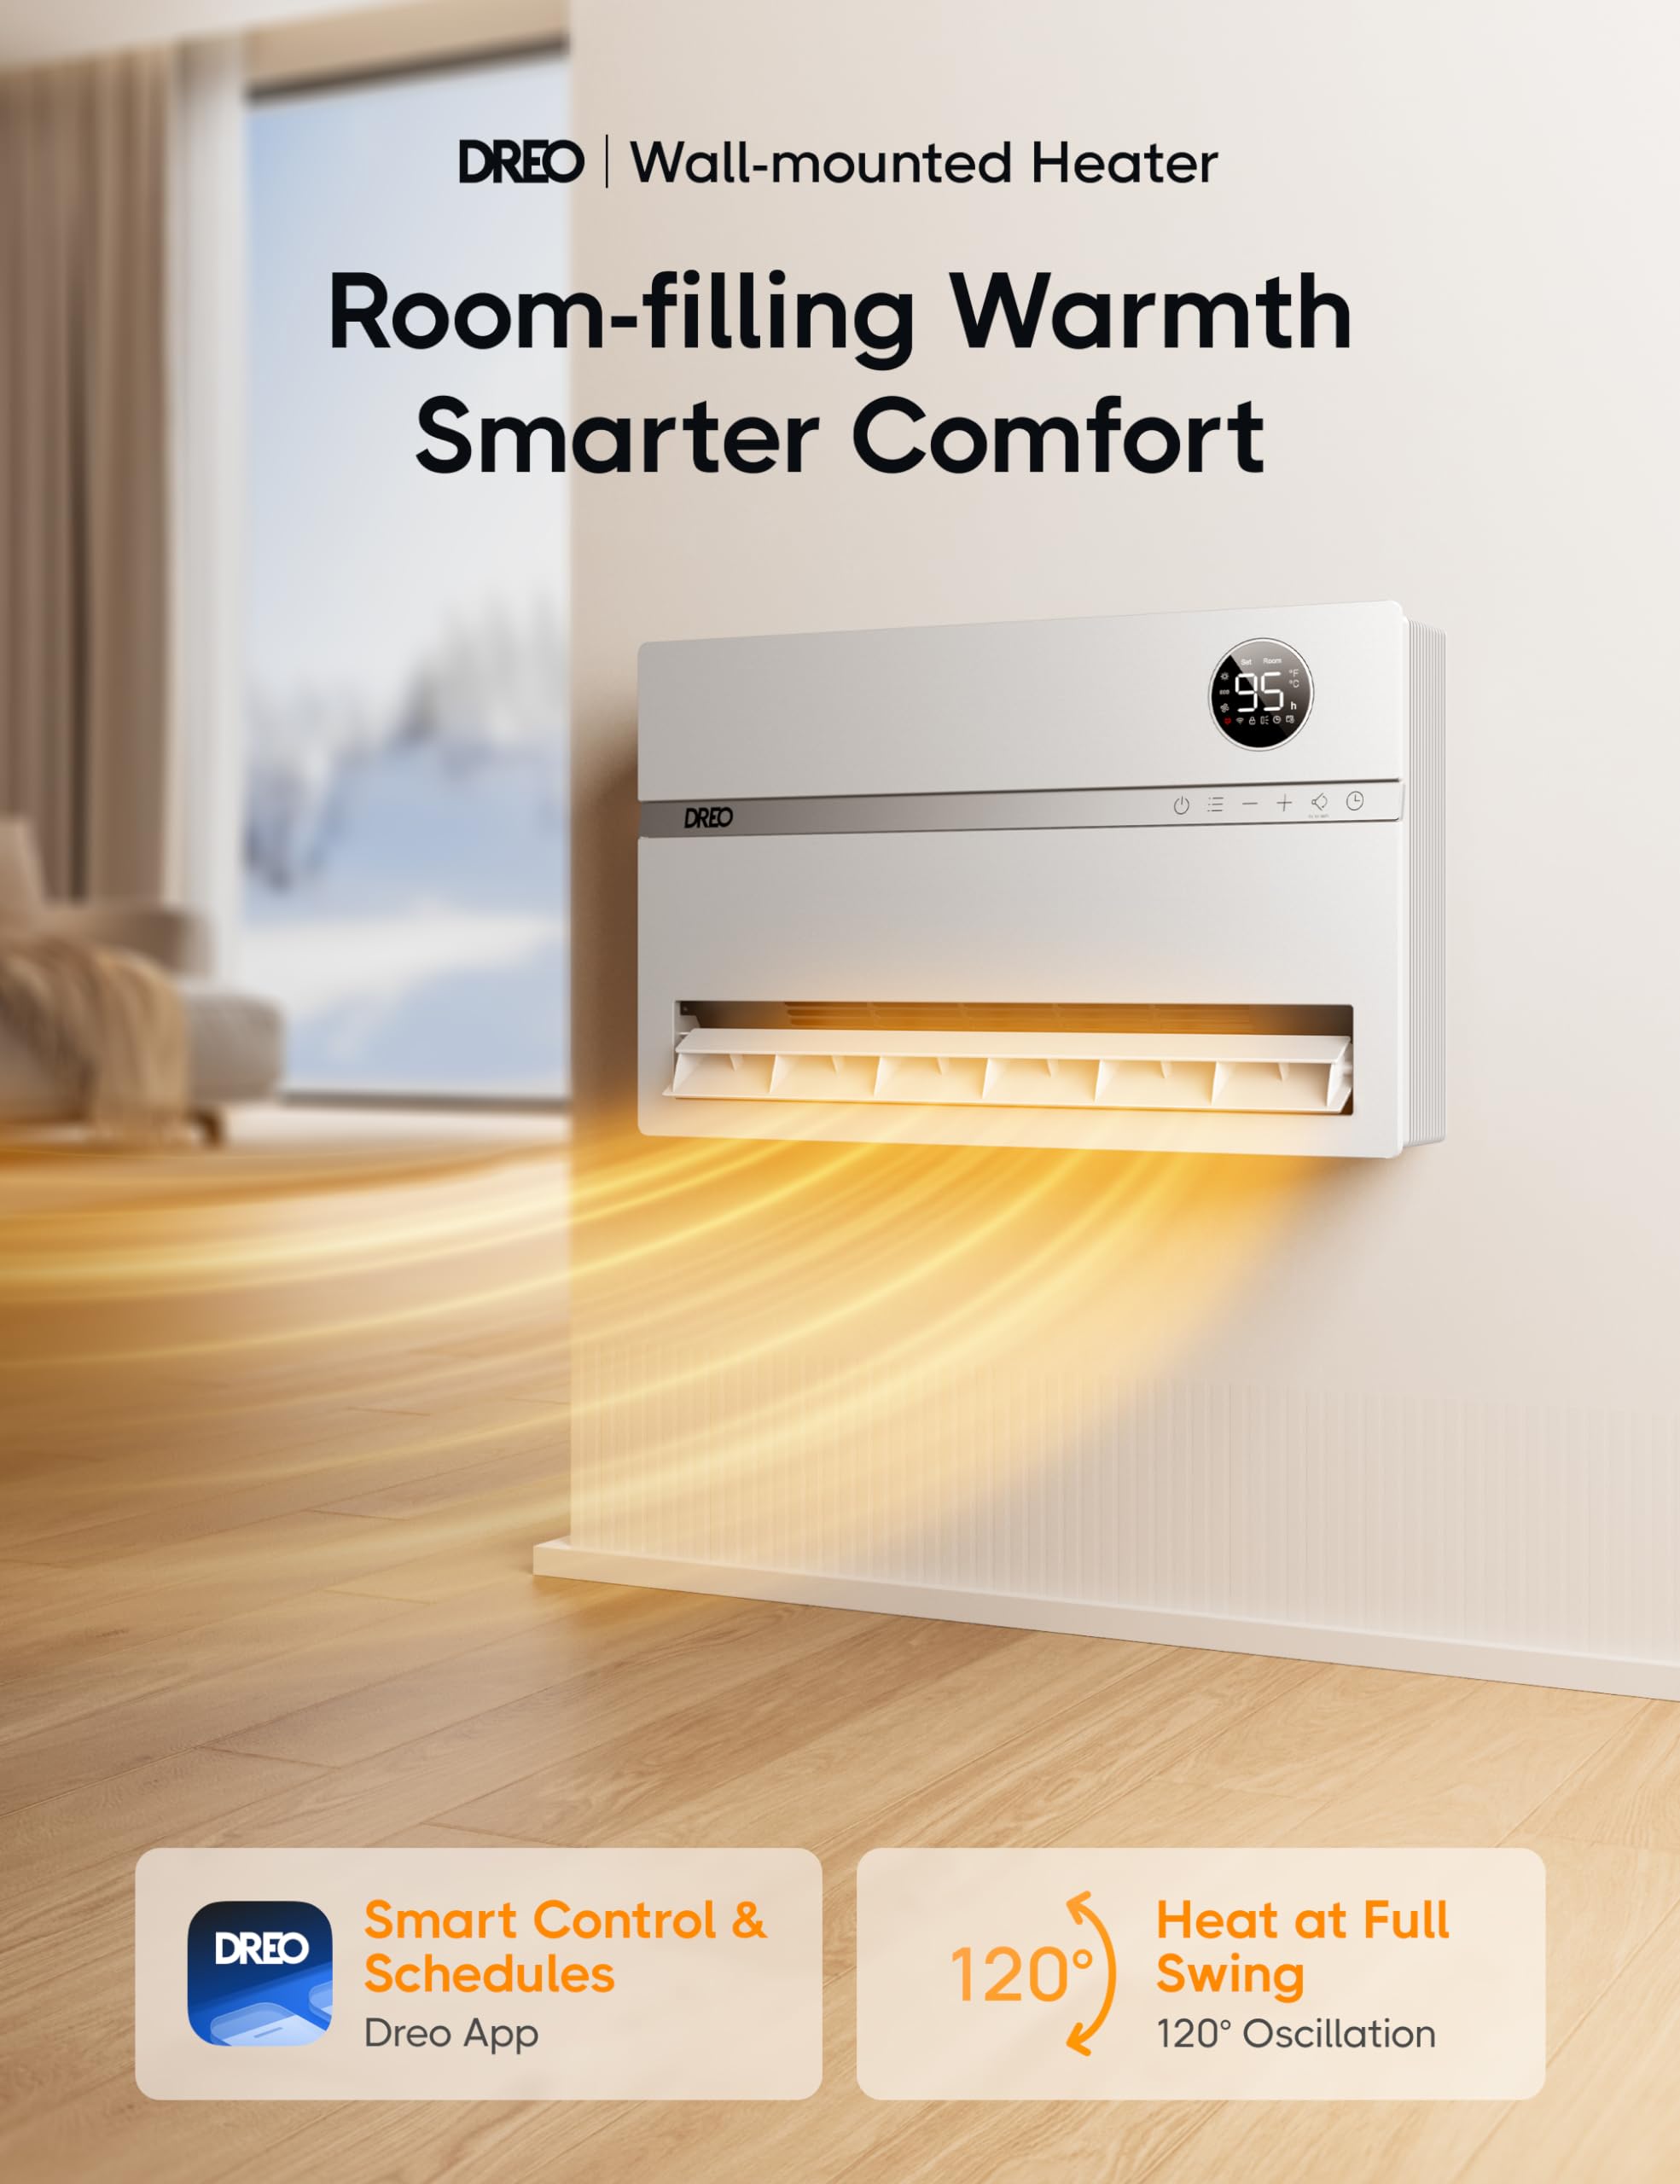 Wall-Mounted Heater, Smart Space Heater for Bedroom with Dreo FortPlug Overheat Protection, 120° Vertical Oscillation, Thermostat, 24H Timer, 1500W Electric Heater for Indoor, Garage, WH729S